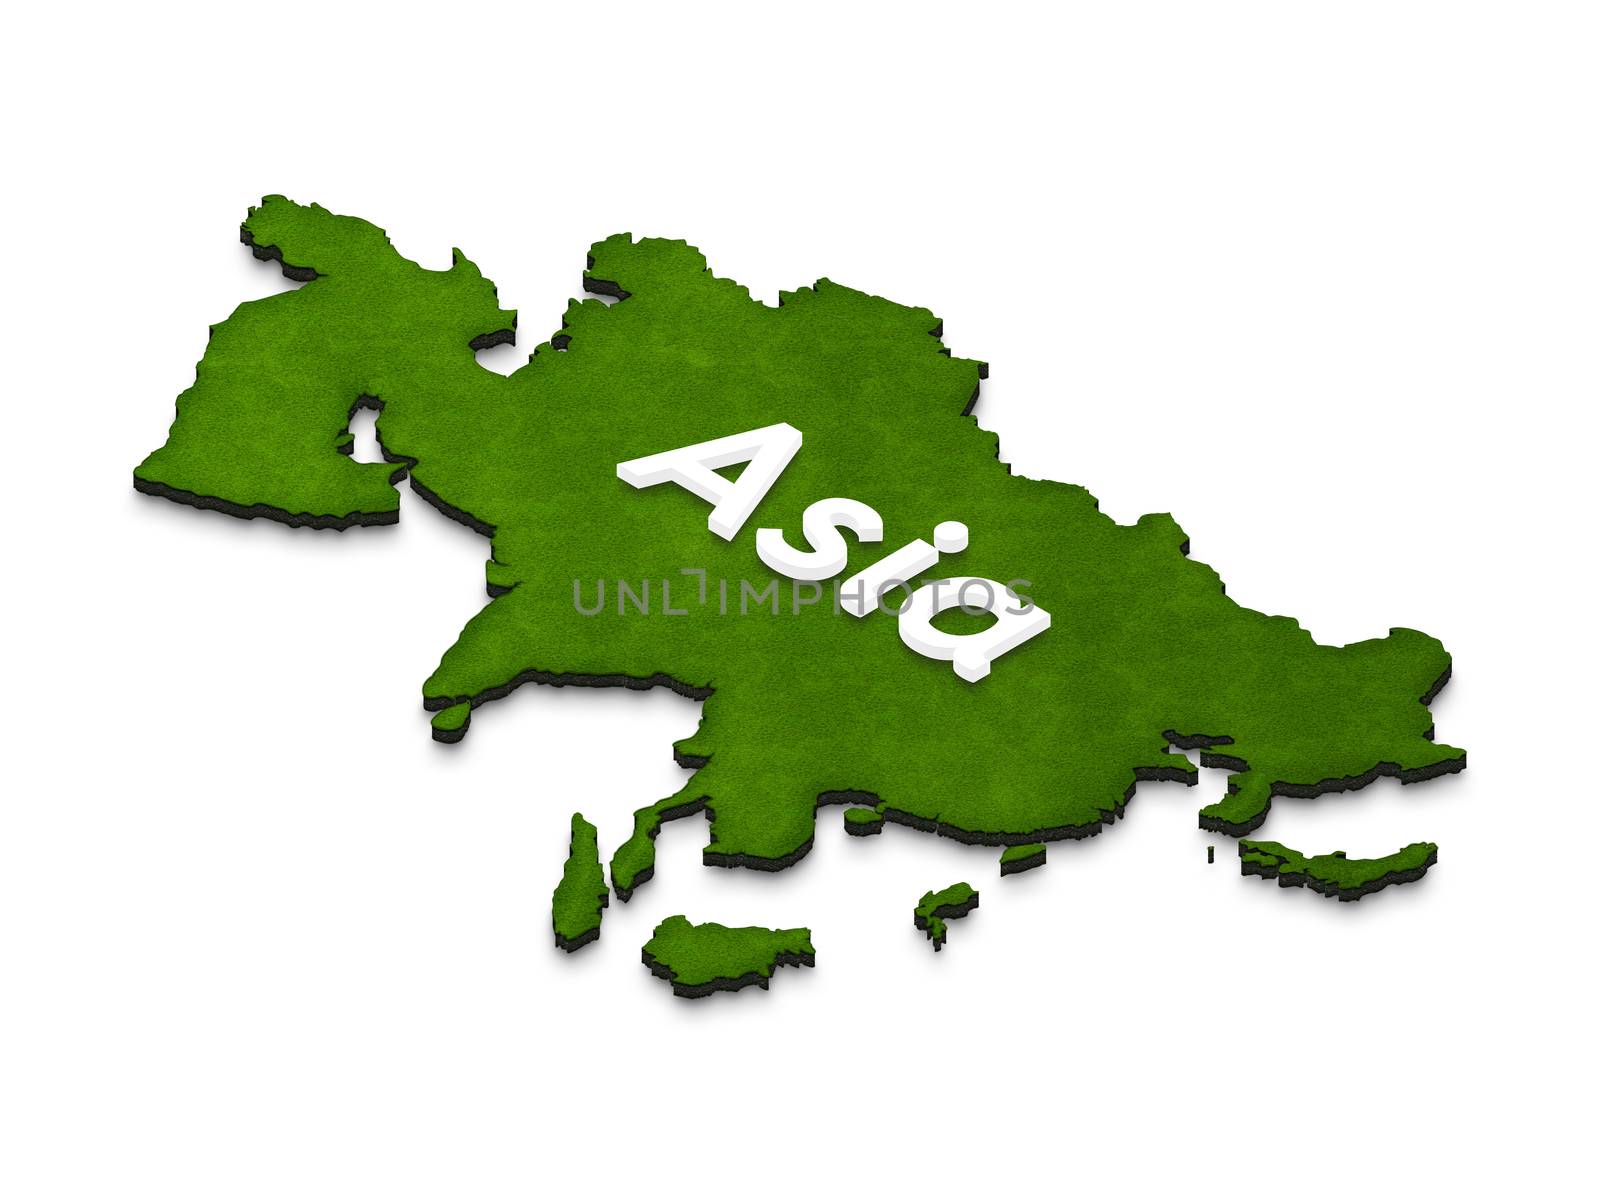 Illustration of a green ground map of Asia on isolated background. Left 3D isometric projection with the name of continent.